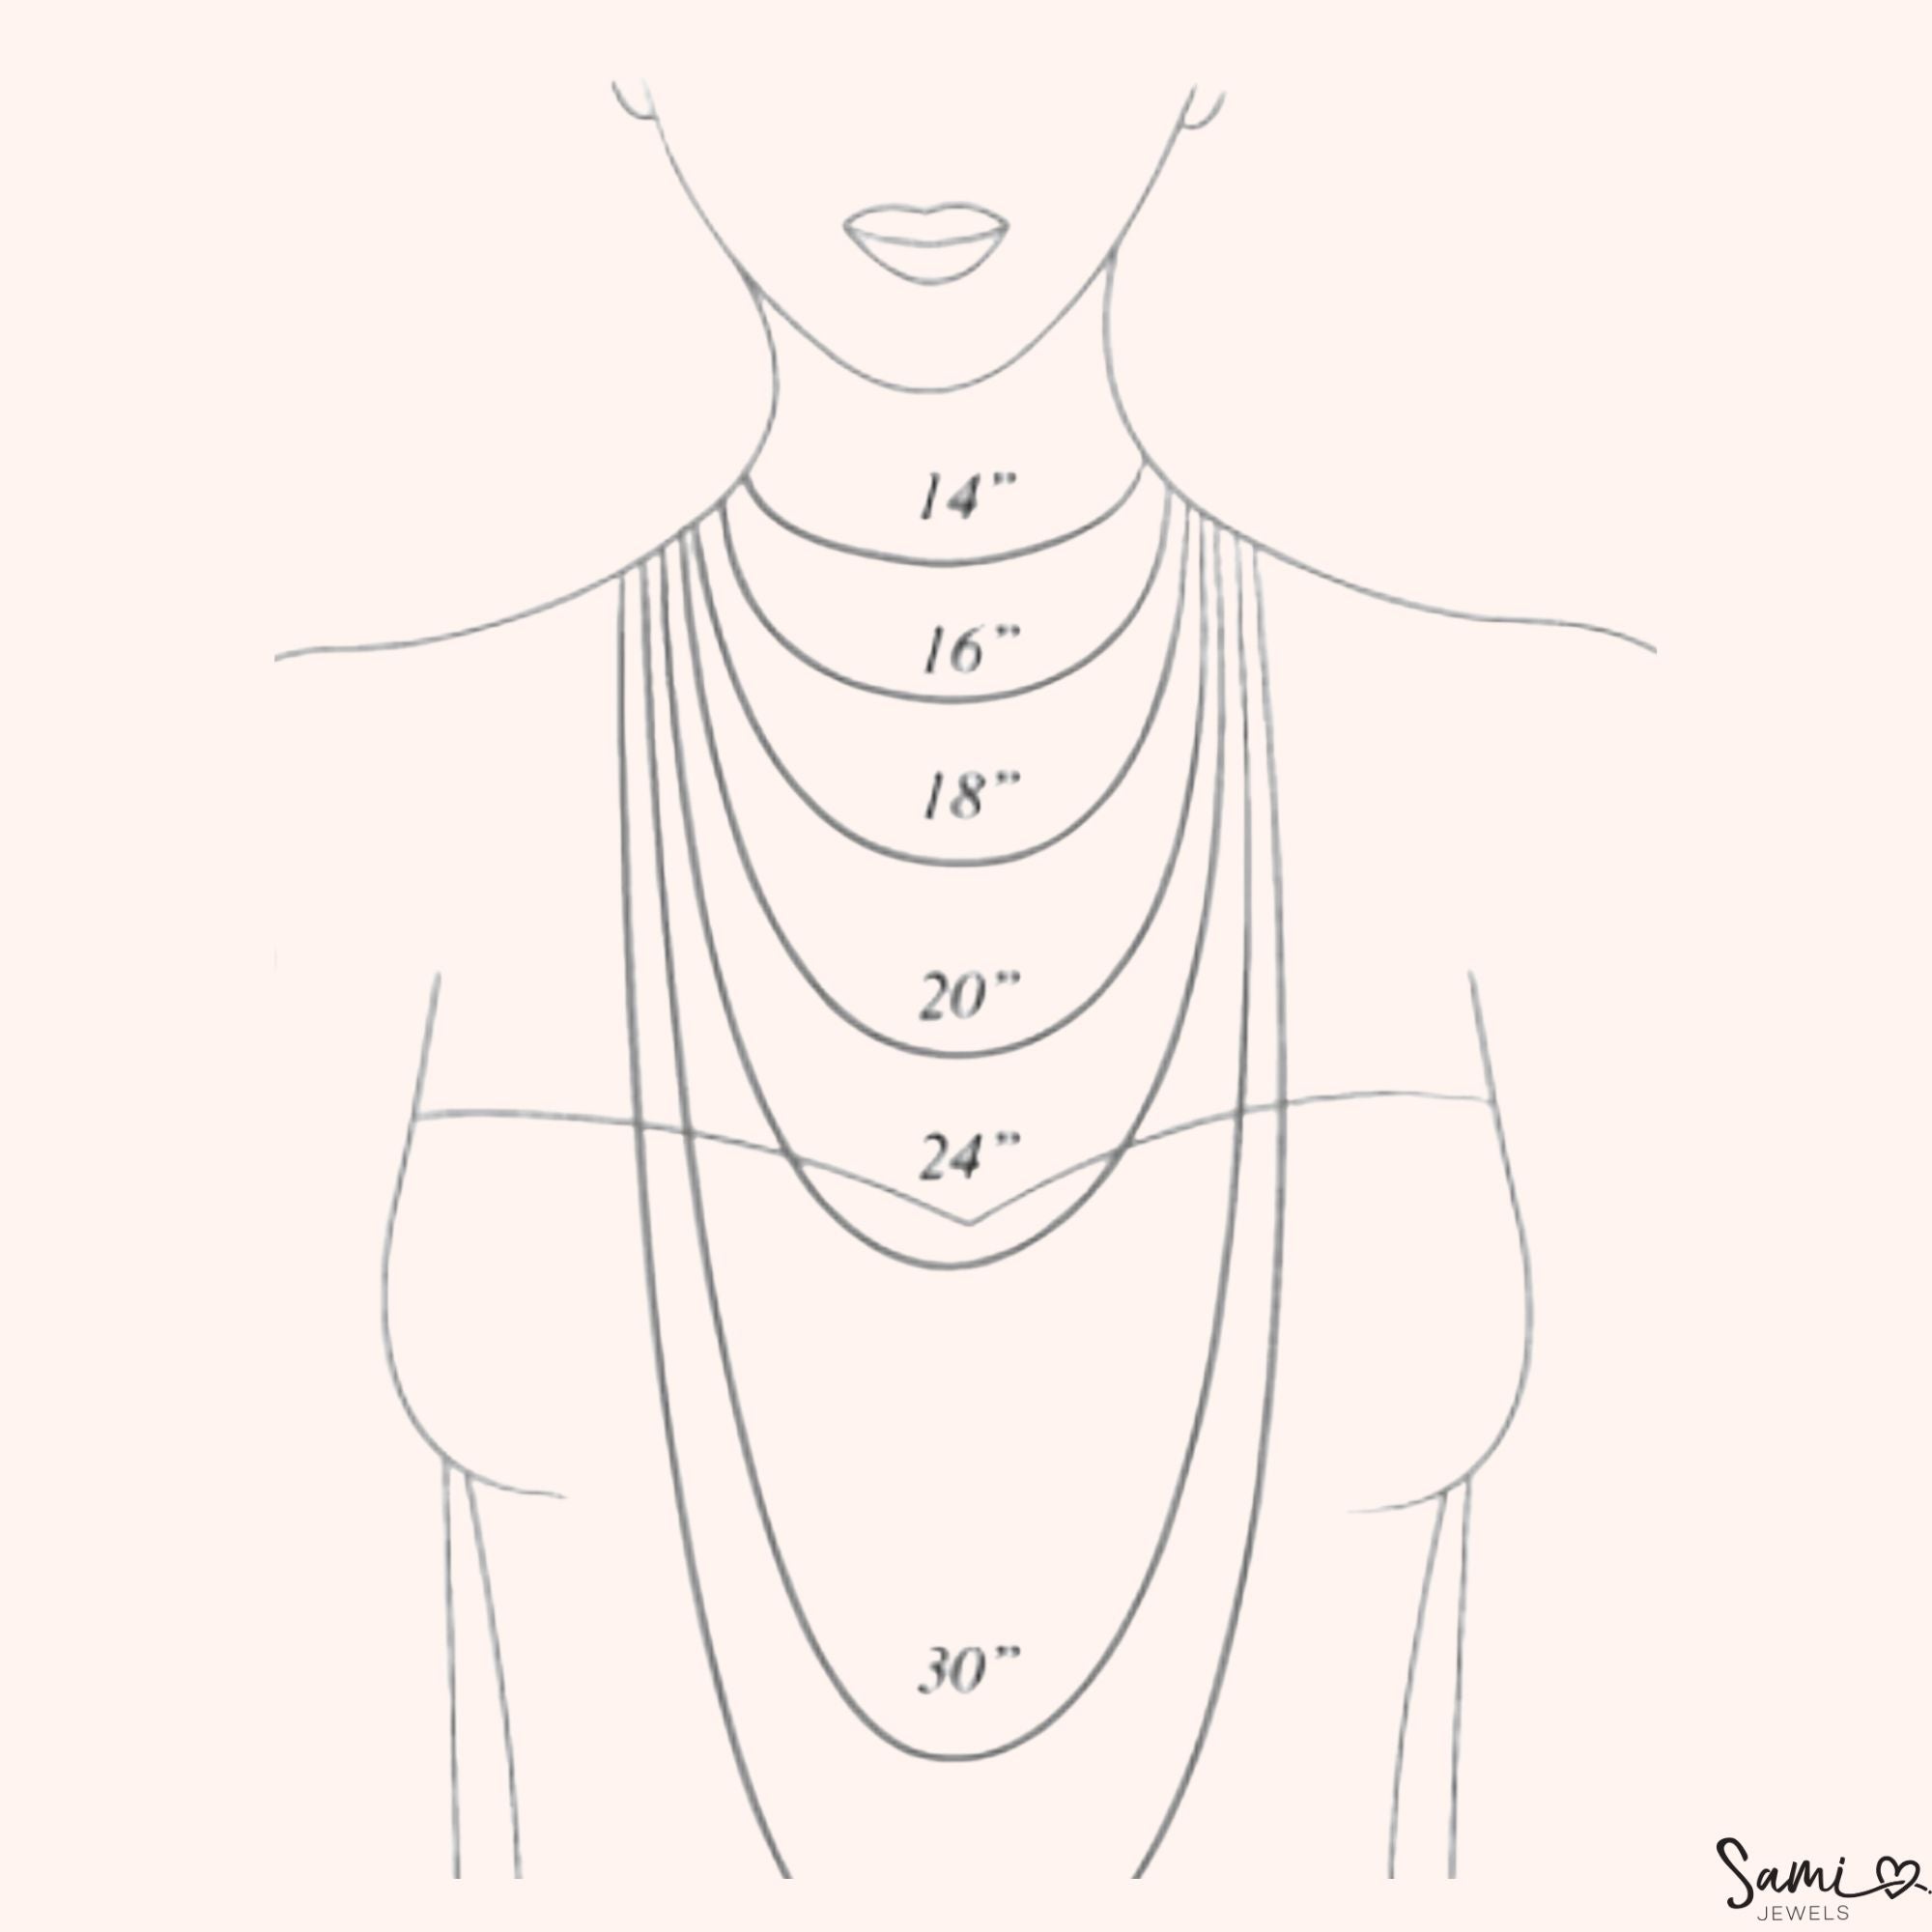 Silver Chain Necklace: Over 11,290 Royalty-Free Licensable Stock  Illustrations & Drawings | Shutterstock